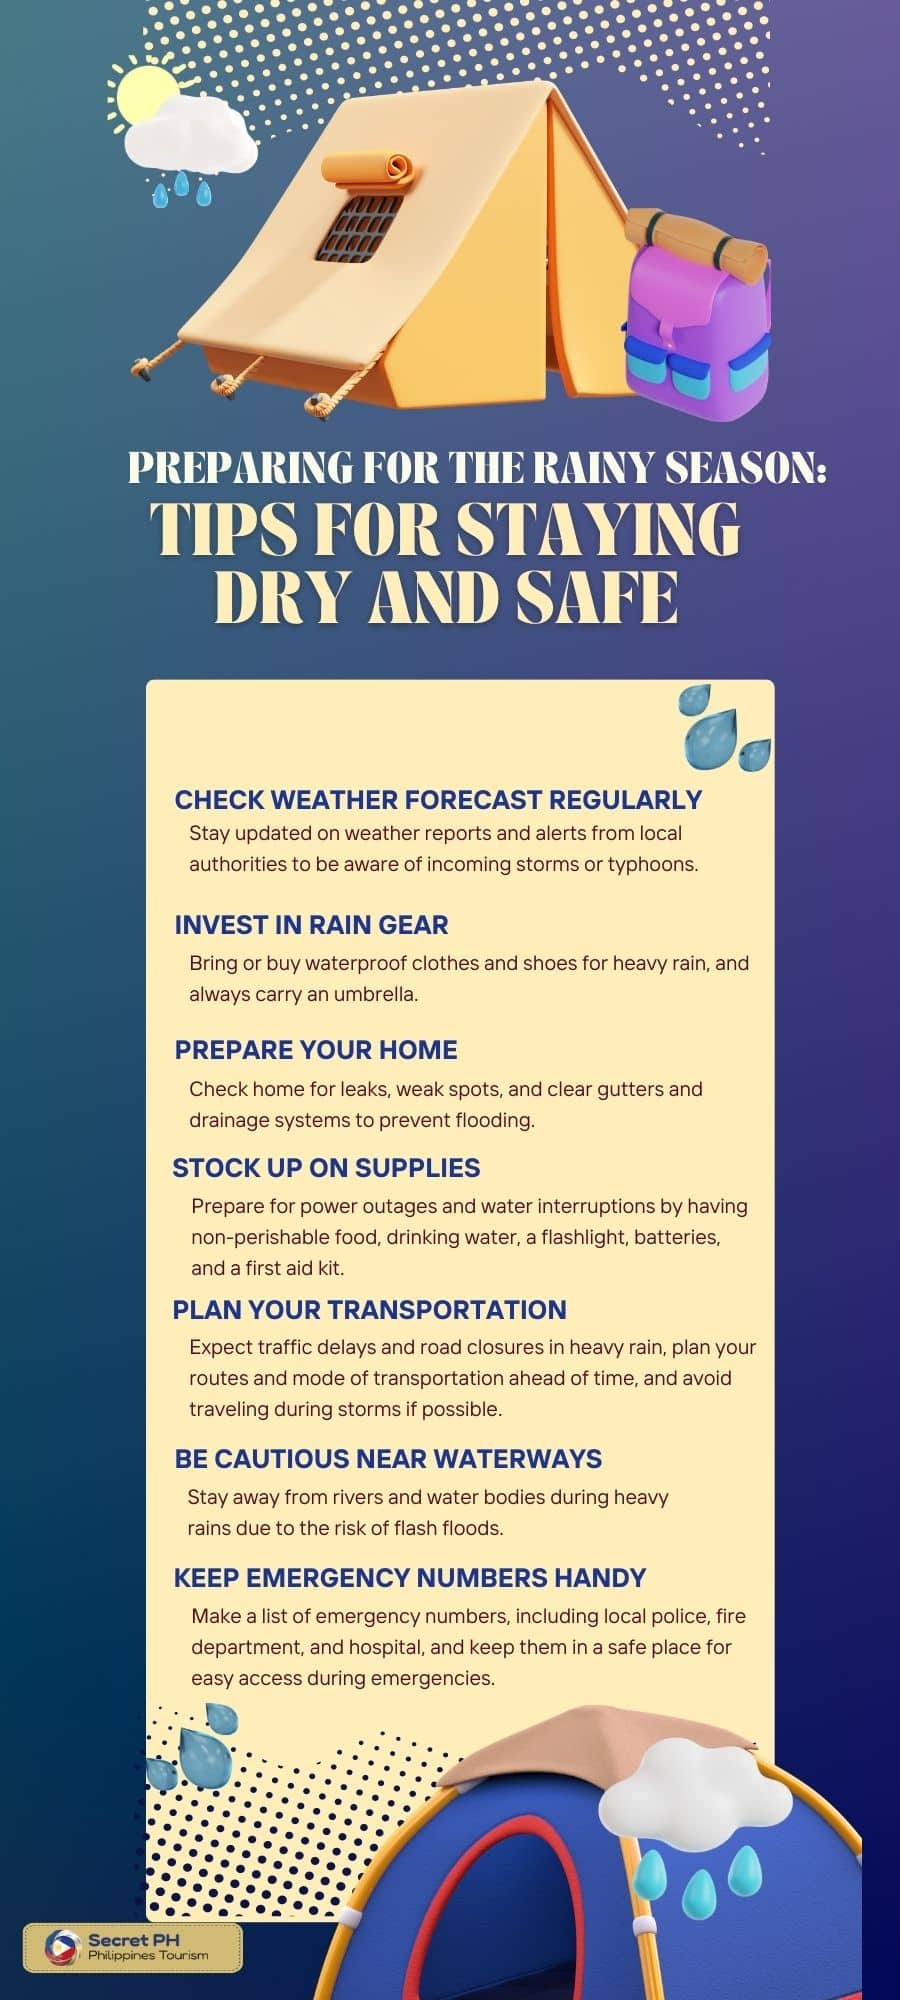 Preparing for the Rainy Season Tips for Staying Dry and Safe